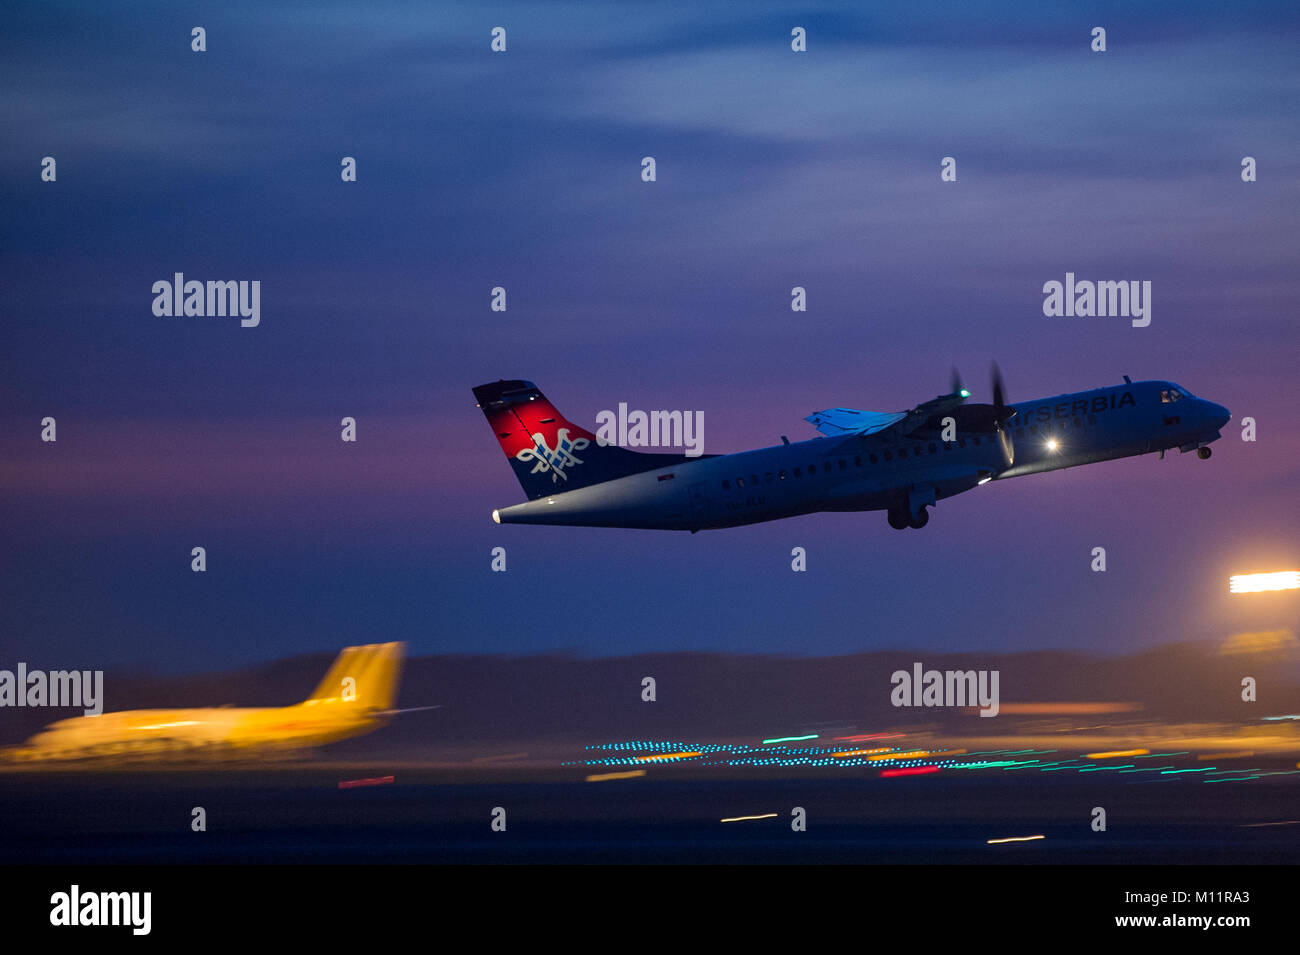 Air Serbia ATR-72 turboprop regional commuter aircraft taking off in dusk Stock Photo